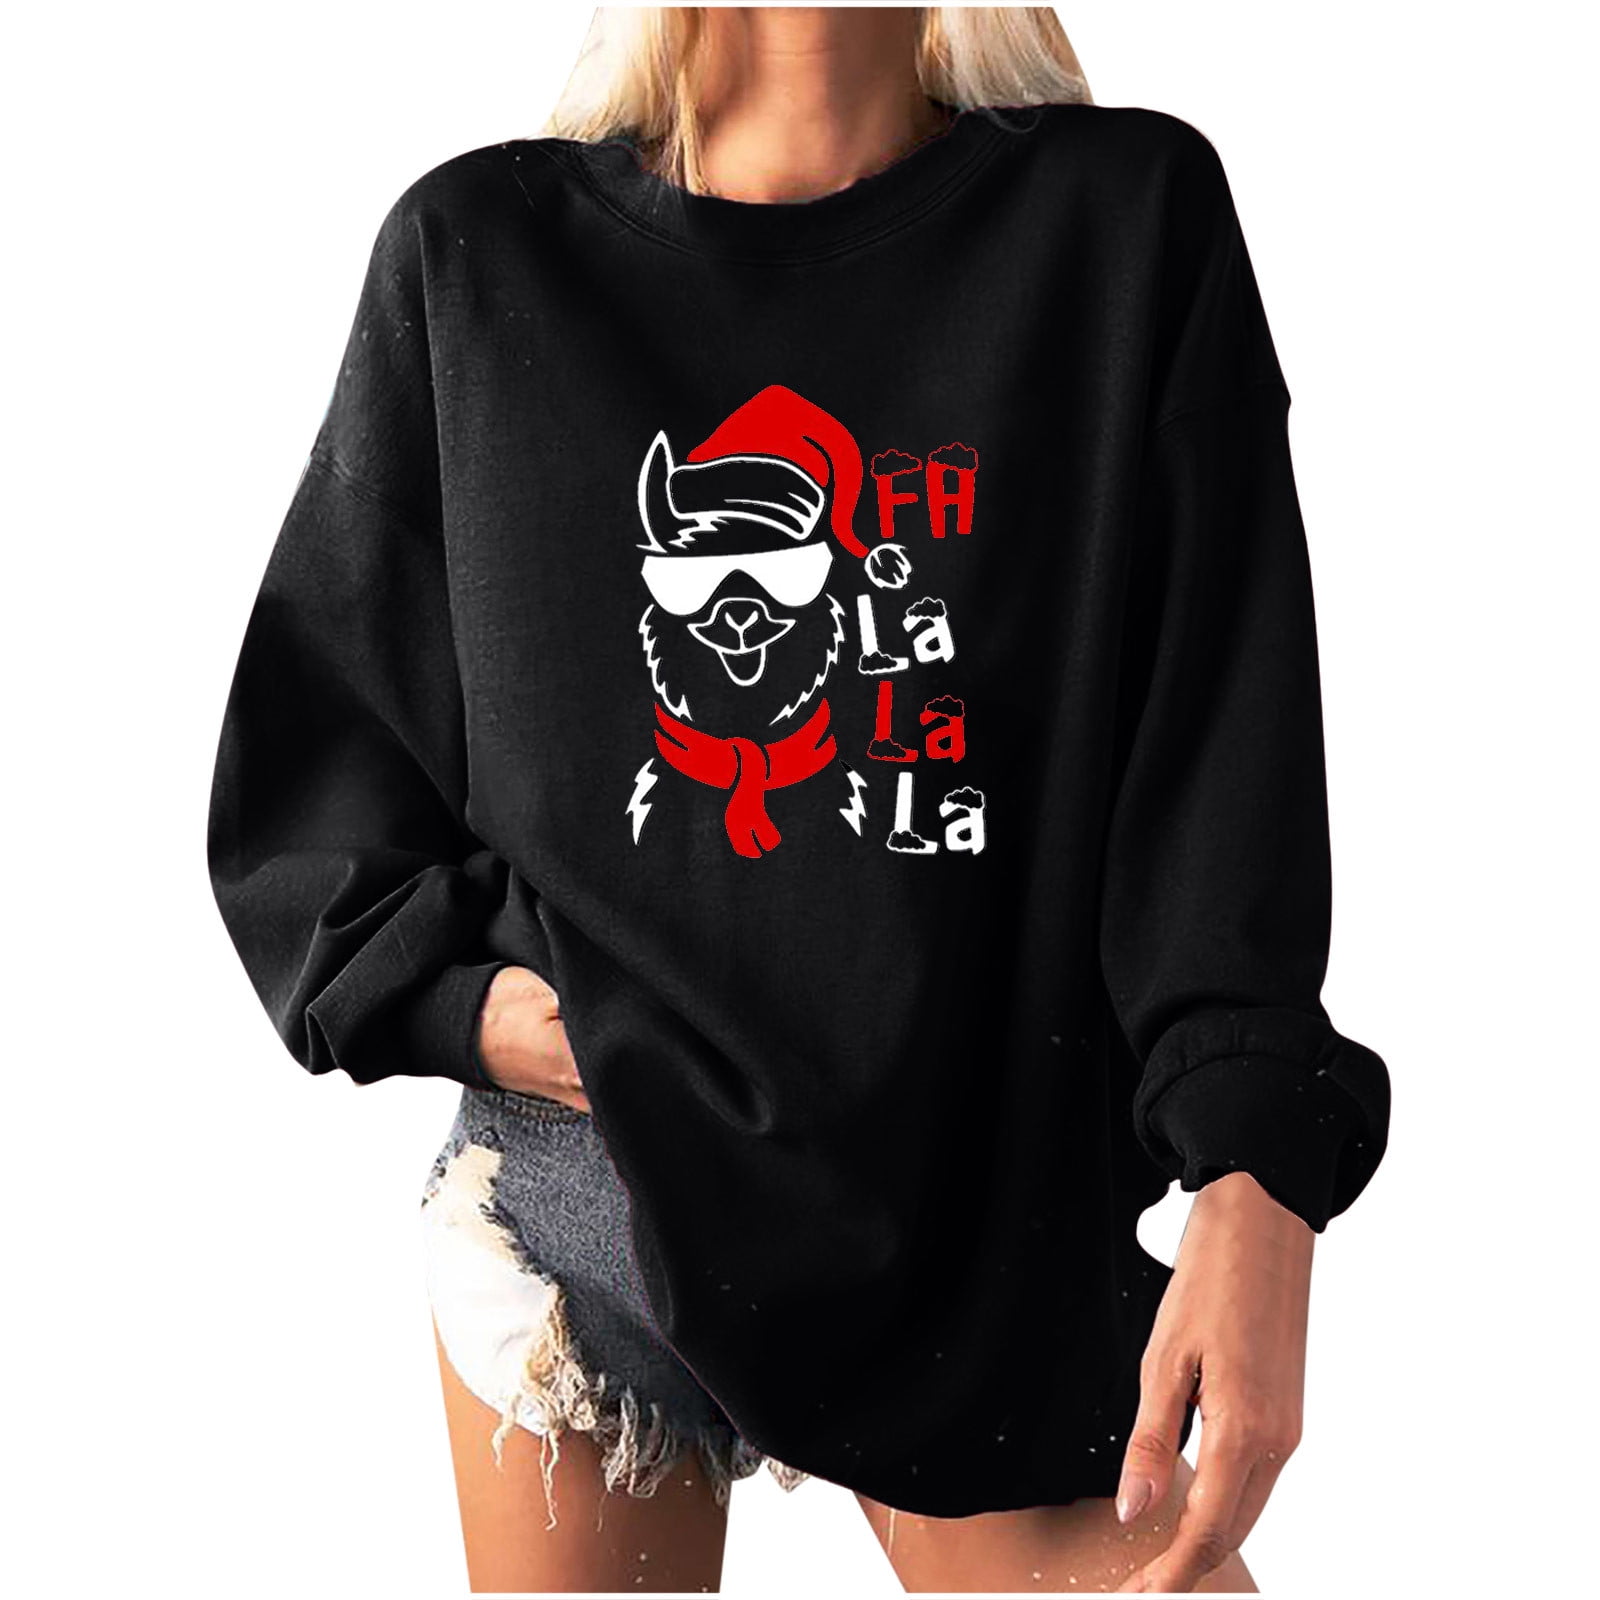 LaLaLa Women's Casual Loose Fit Tunic Tops Long Sleeve Comfy Sweatshirts Pullover T-Shirts Blouses 